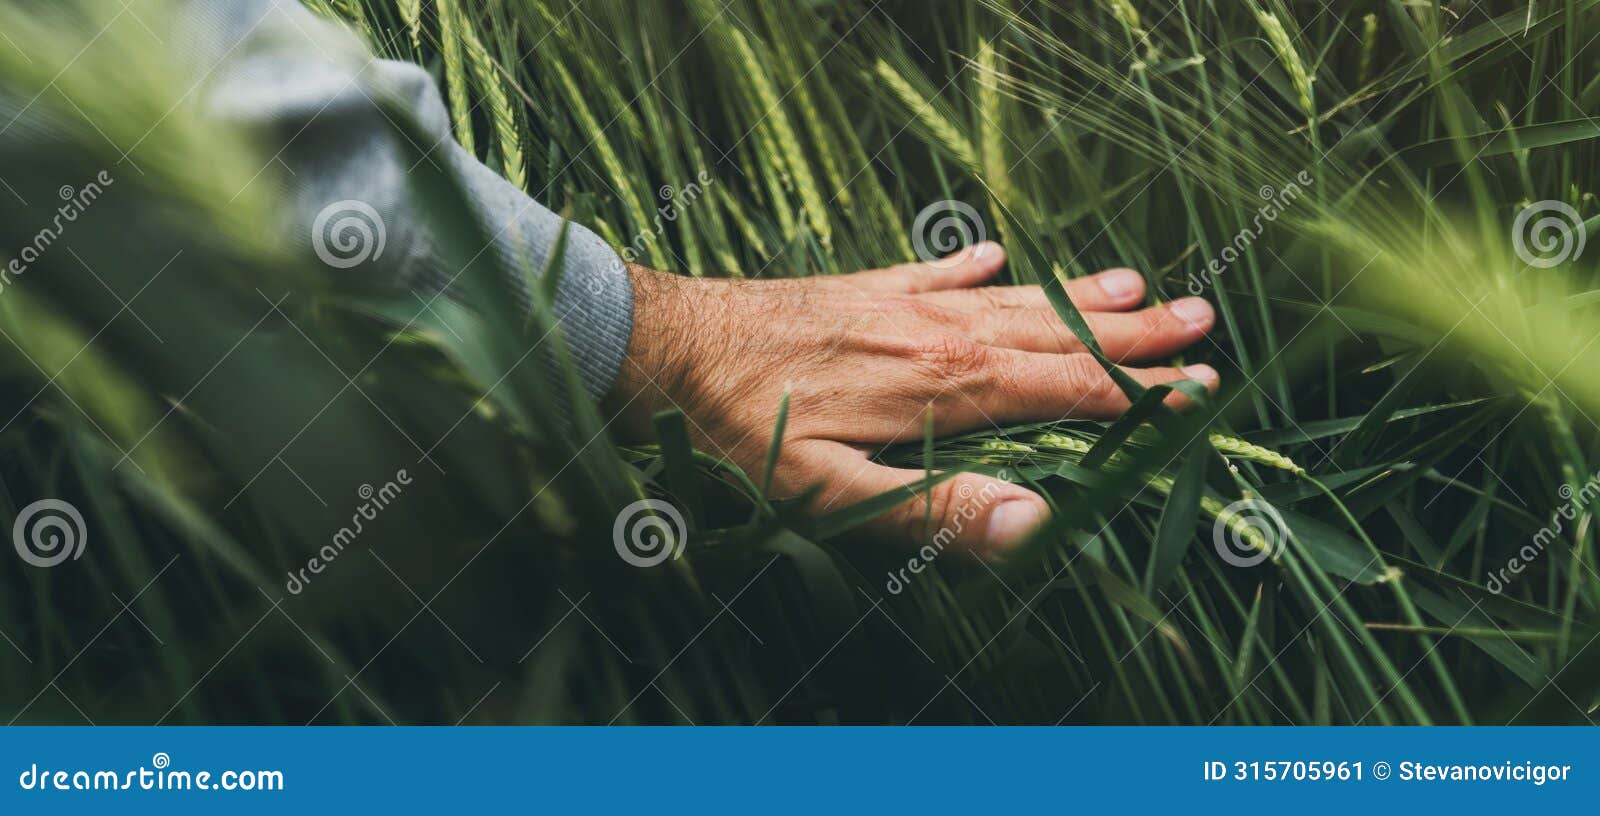 closeup of farmer's hand gently touching green ripening barley ears in cultivated field, concept of organic agricultural